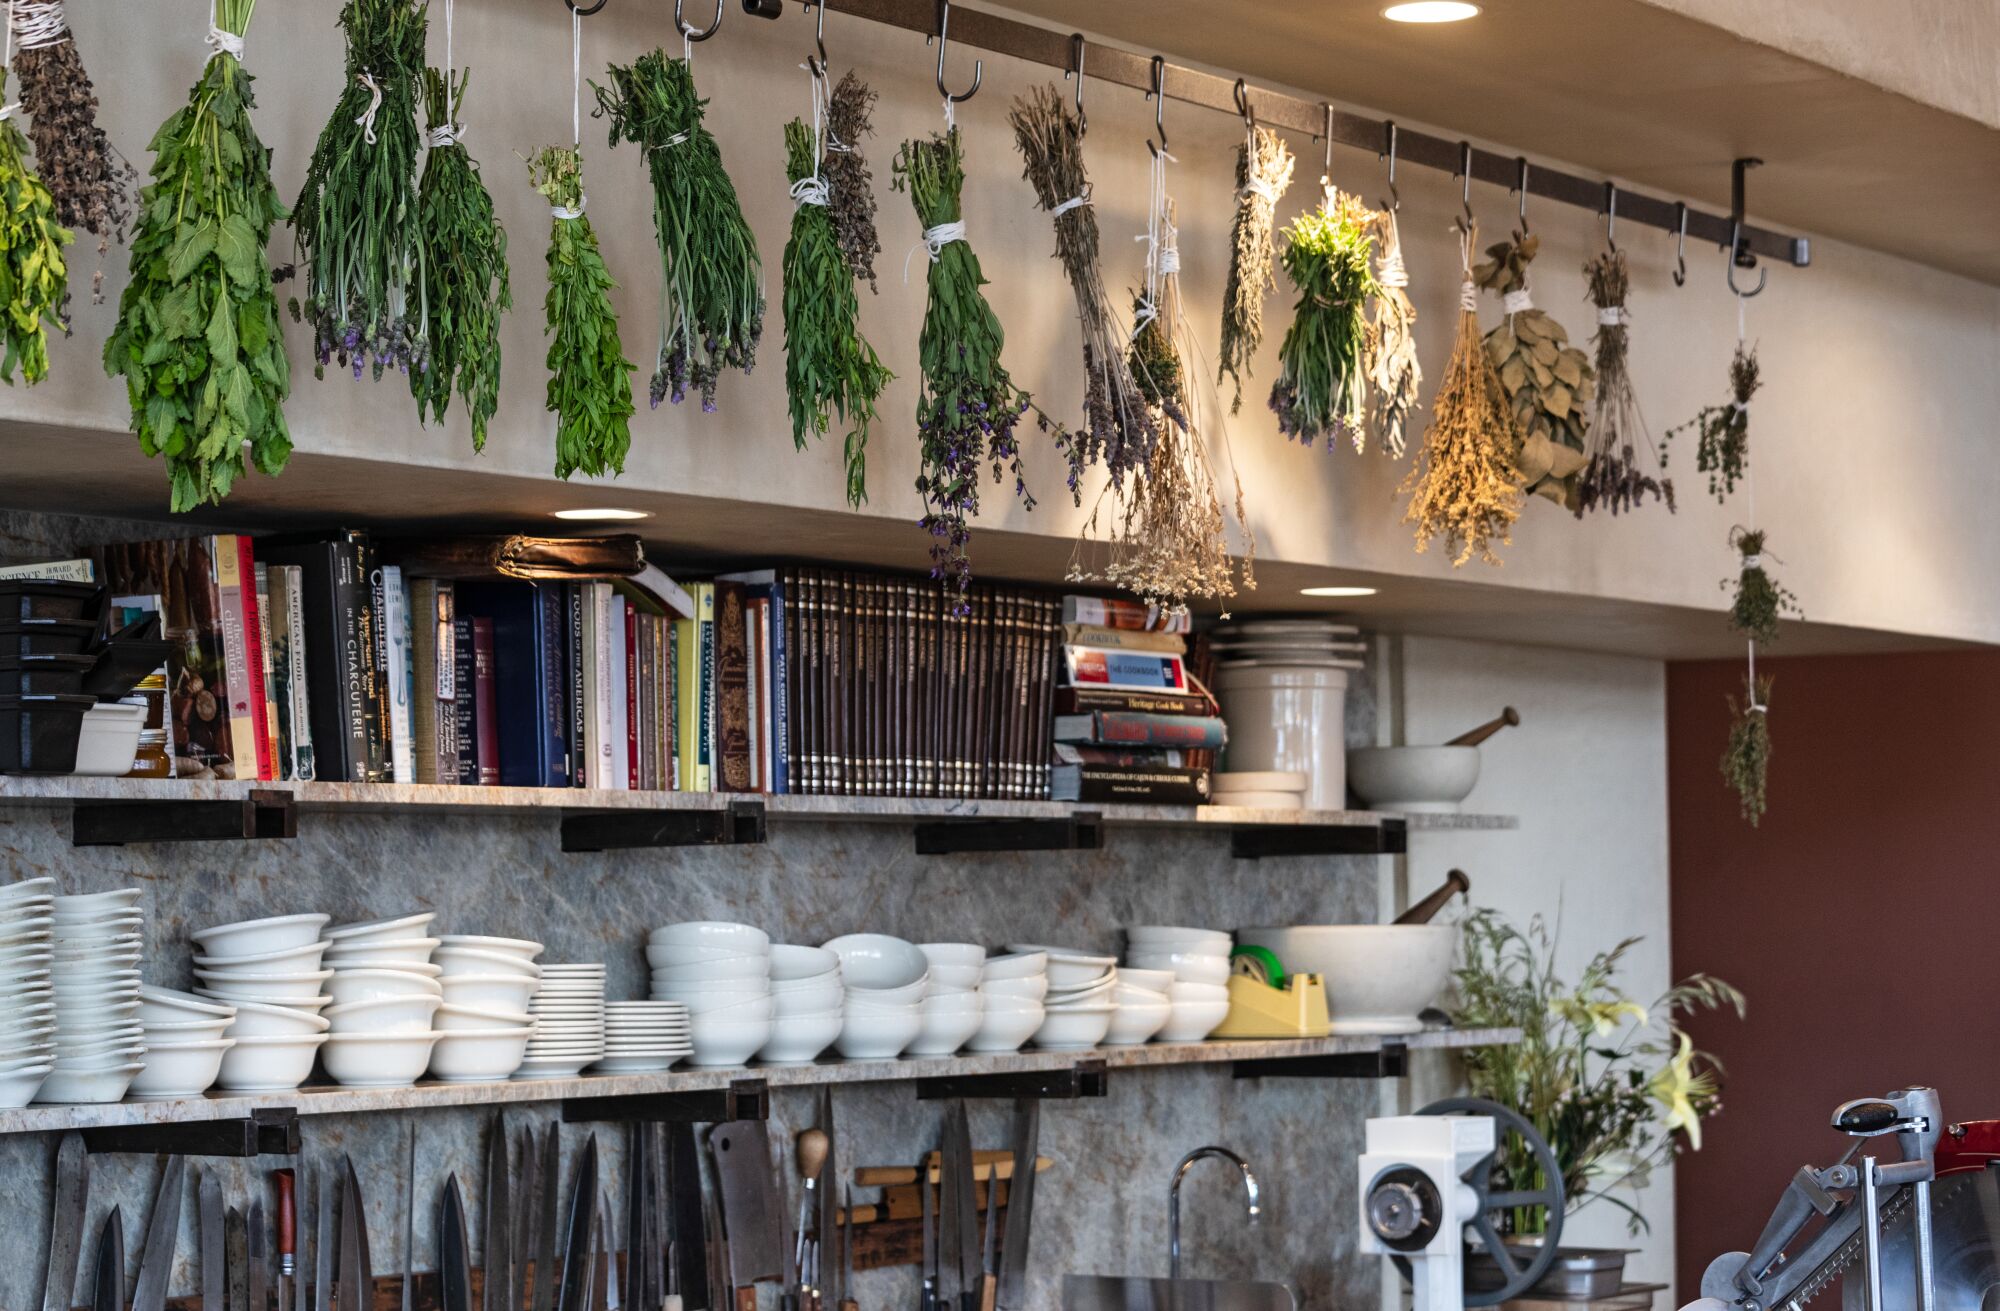 Bunches of herbs hang above shelves lined with books and dishes.